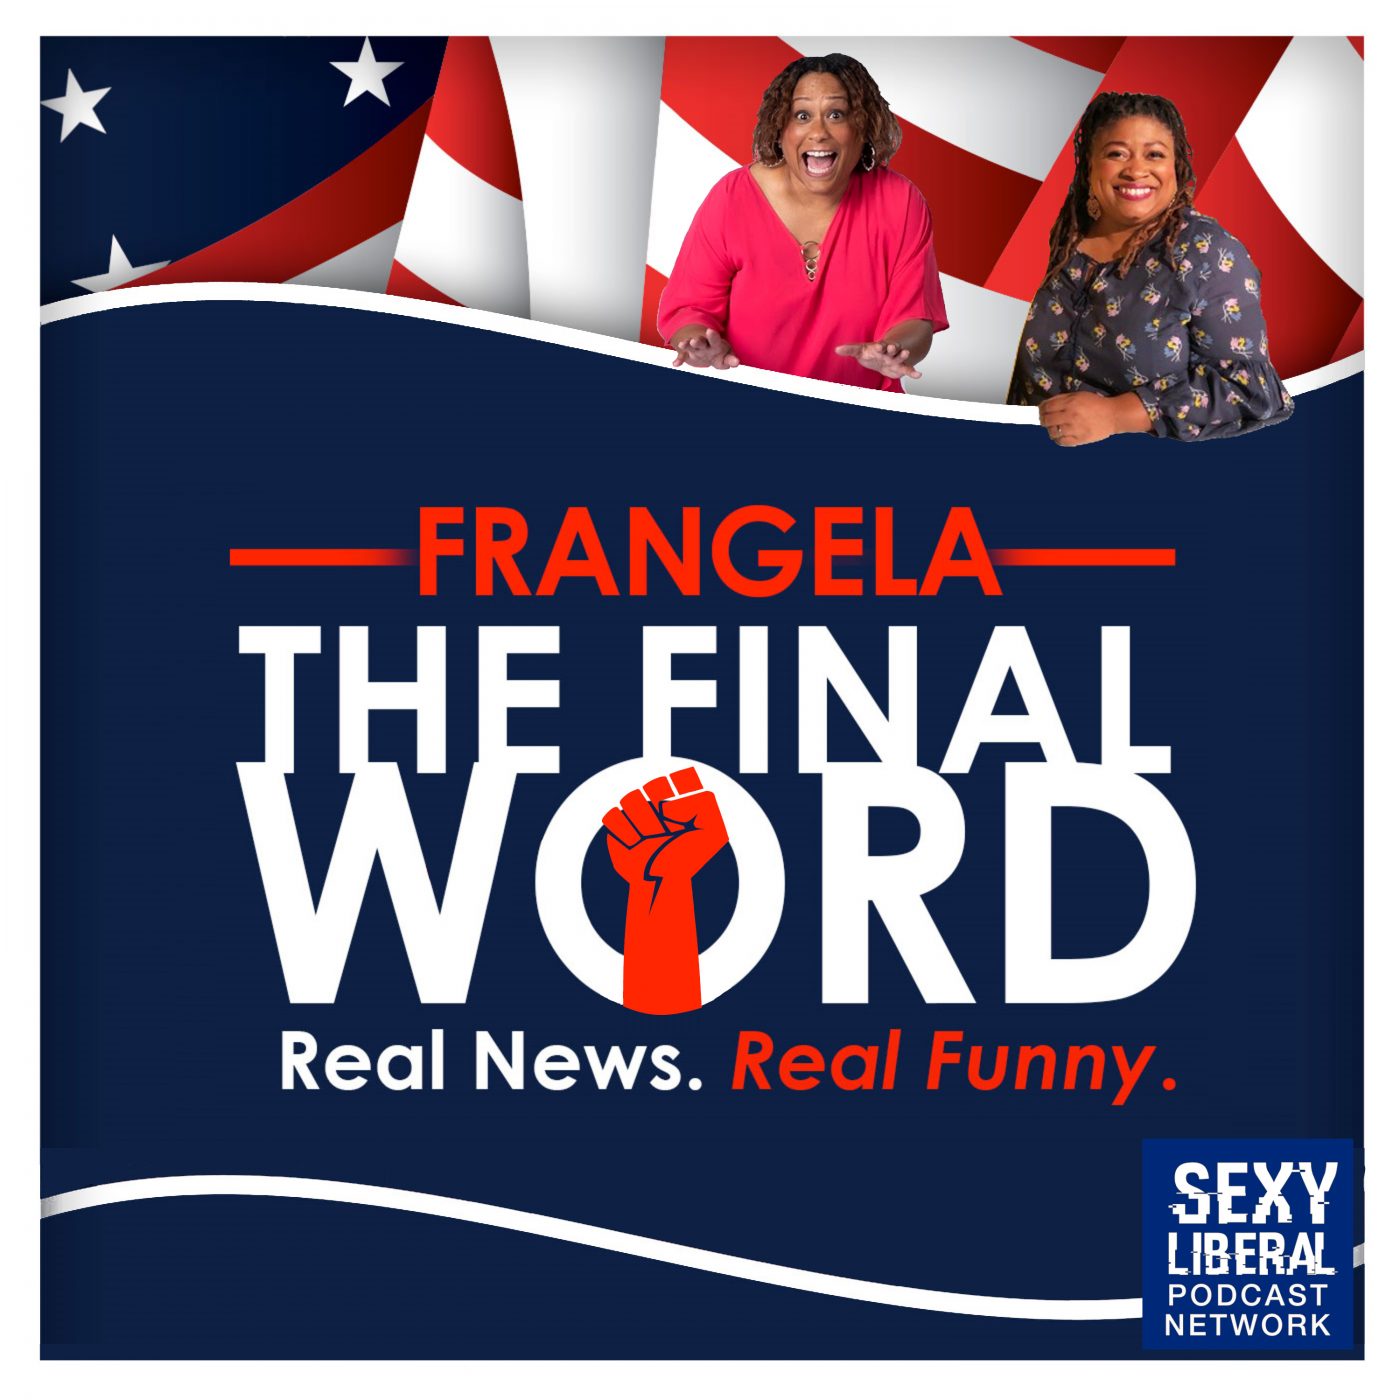 Frangela The Final Word Stephanie Miller S Sexy Liberal Podcast